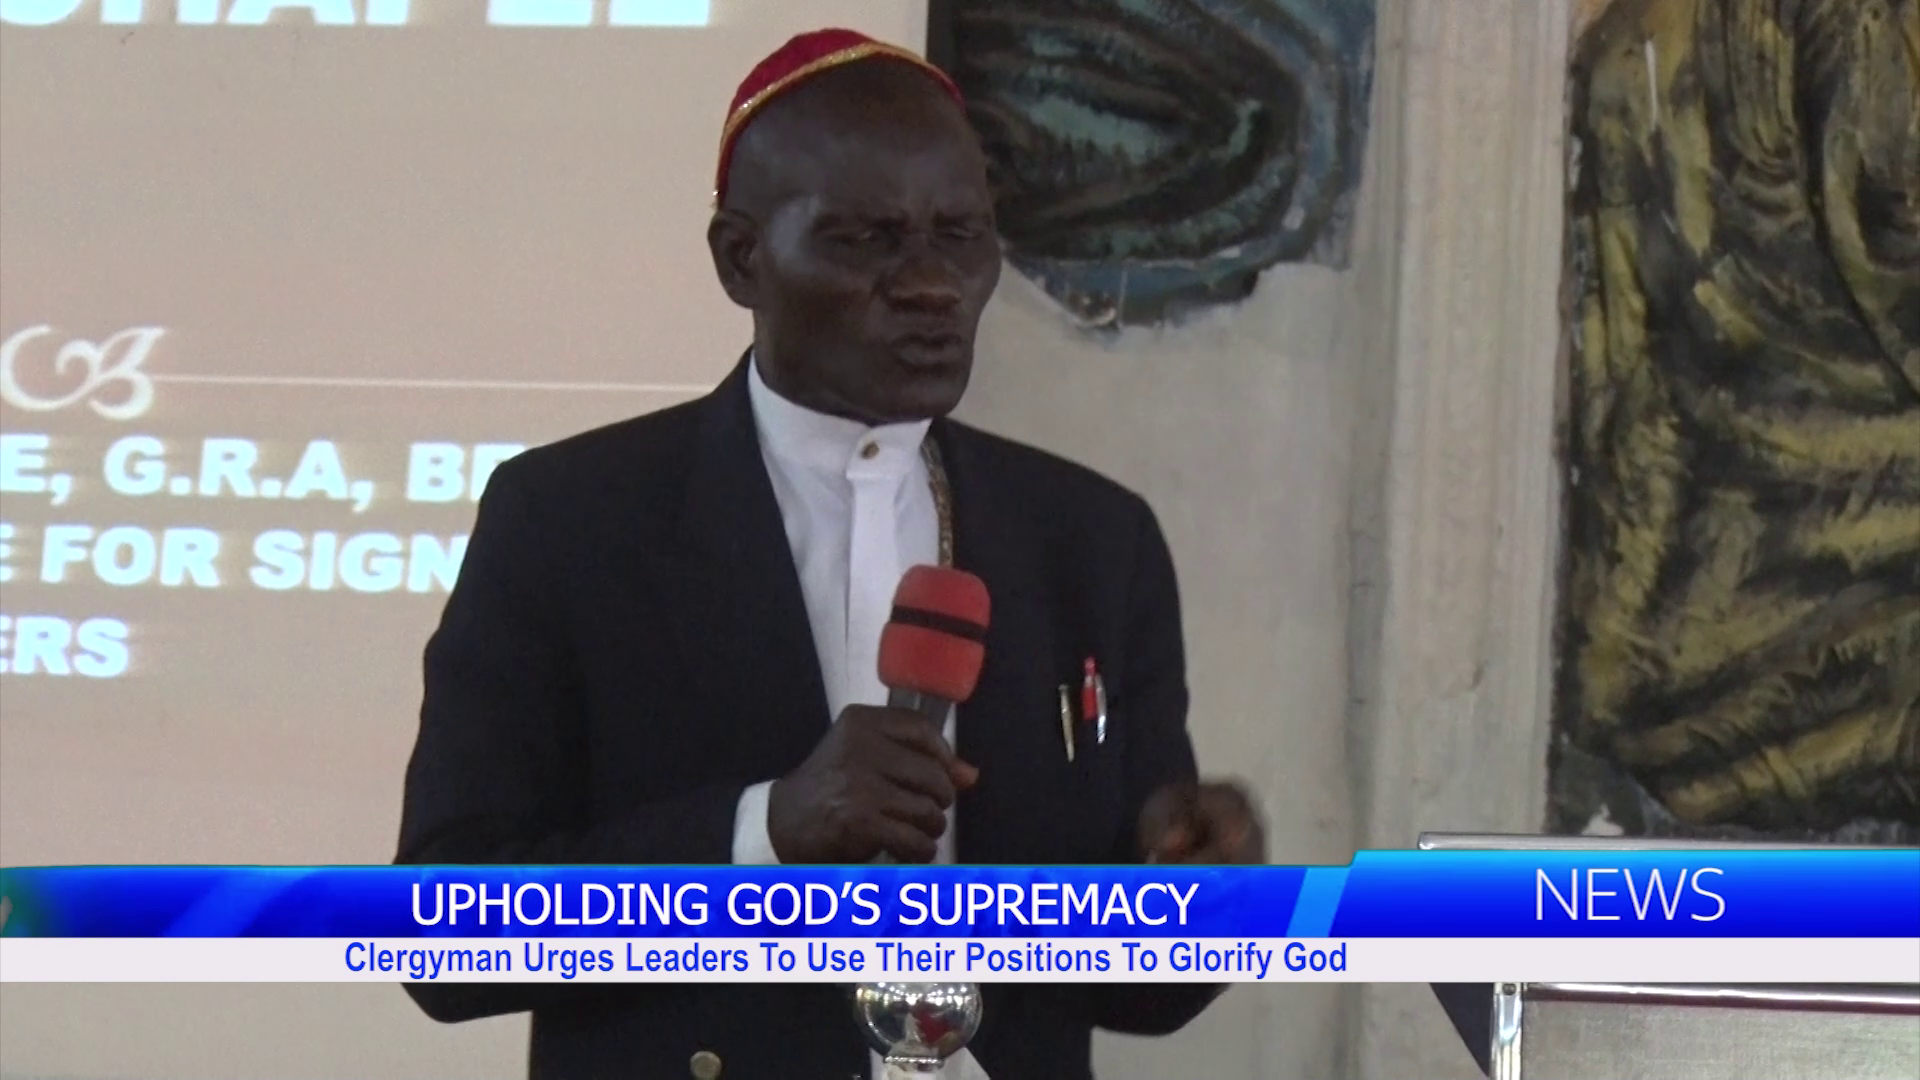 Clergyman Urges Leaders To Use Their Positions To Glorify God